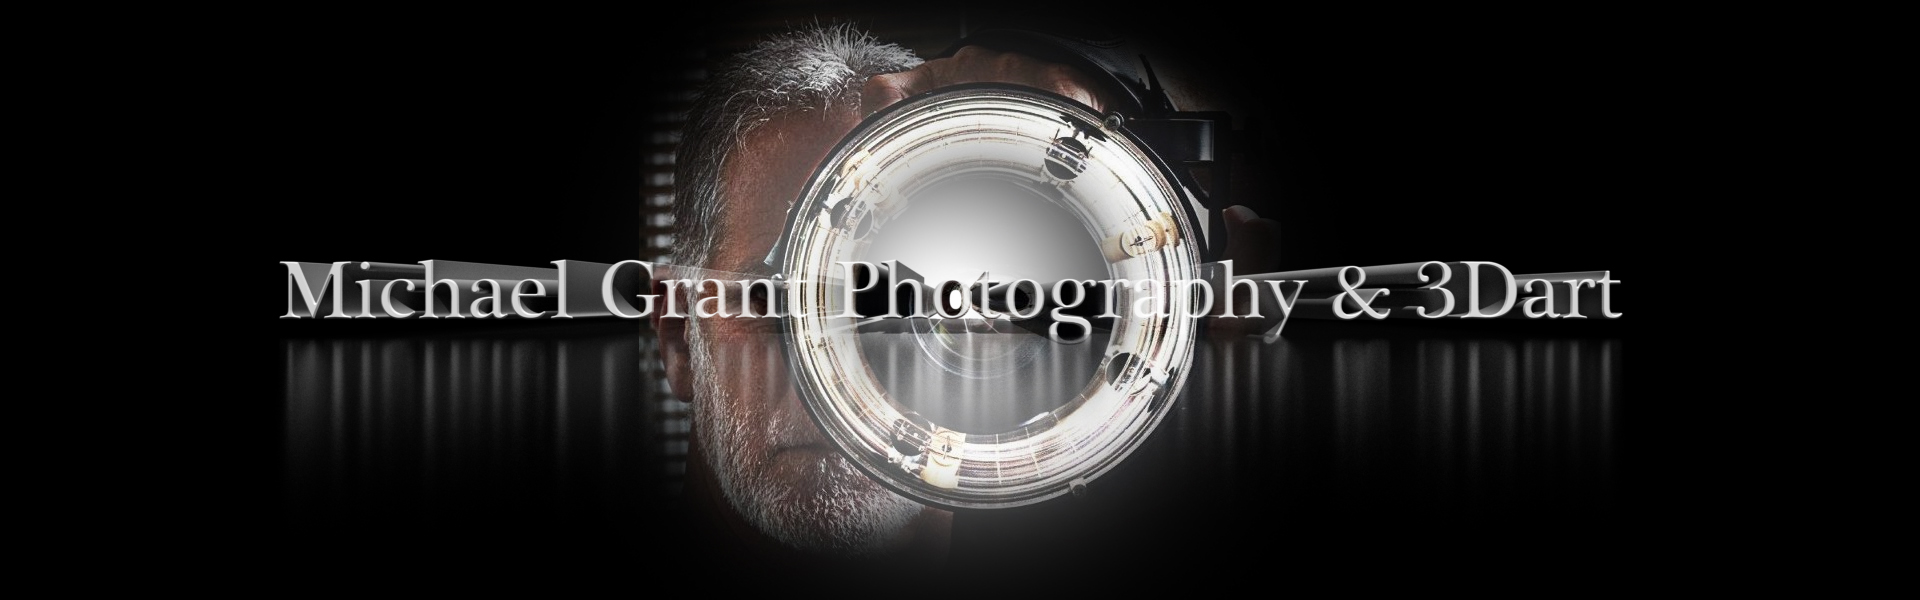 Michael Grant Photography and 3D Art